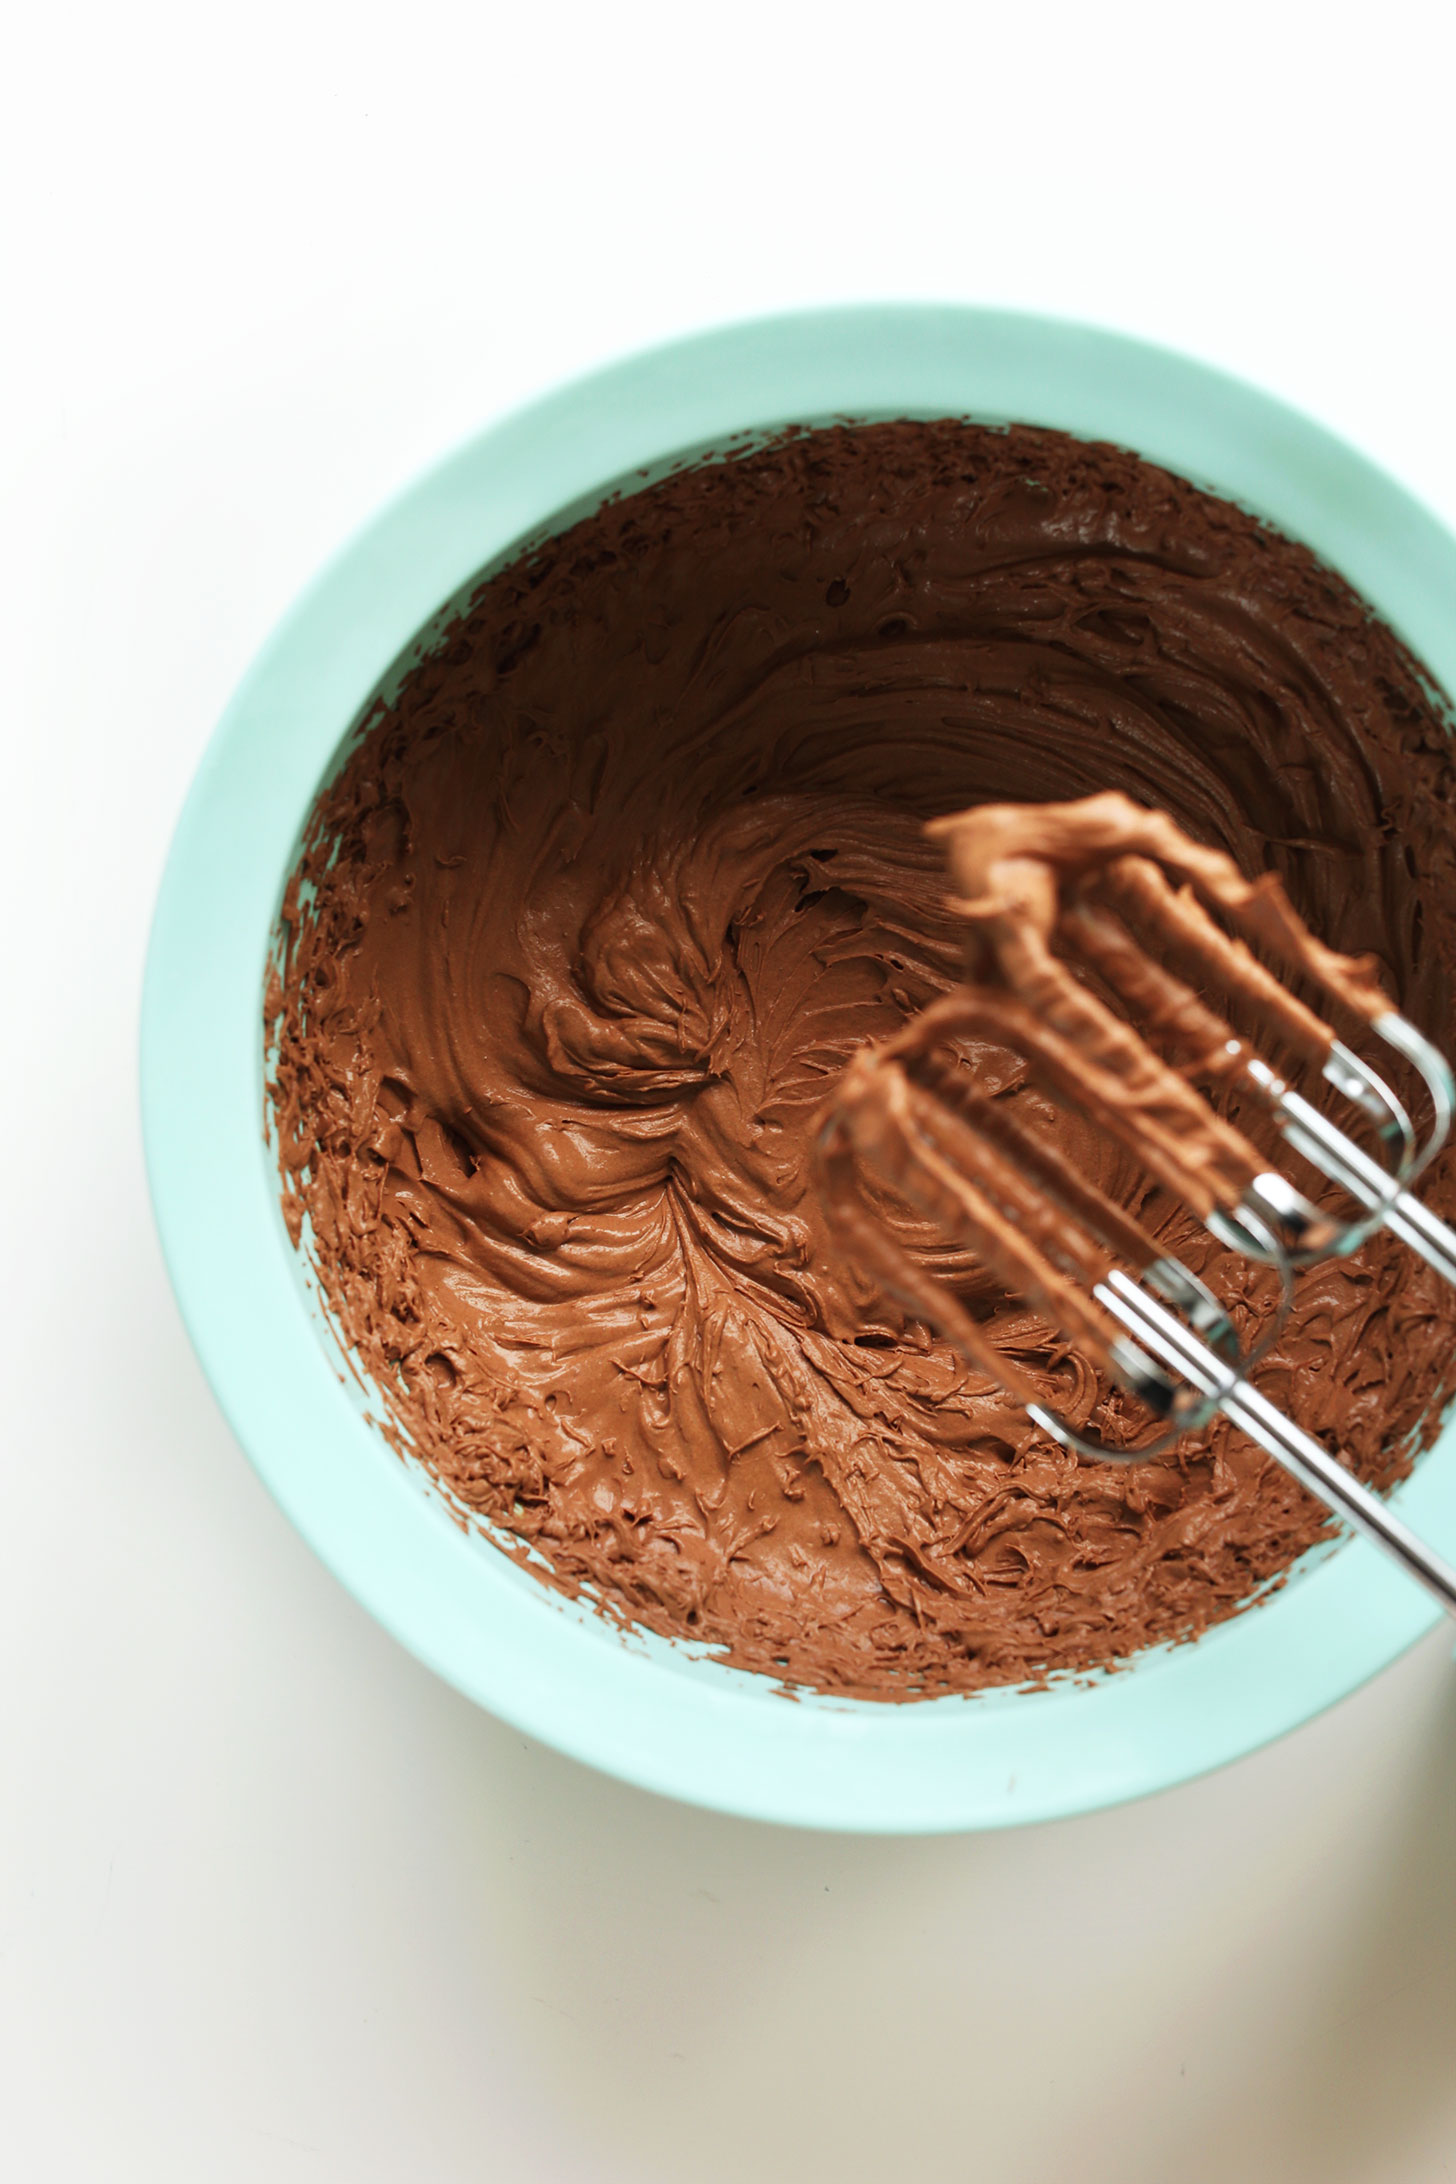 Using a hand mixer to whip the filling of our Pretzel Peanut Butter Chocolate Pie recipe